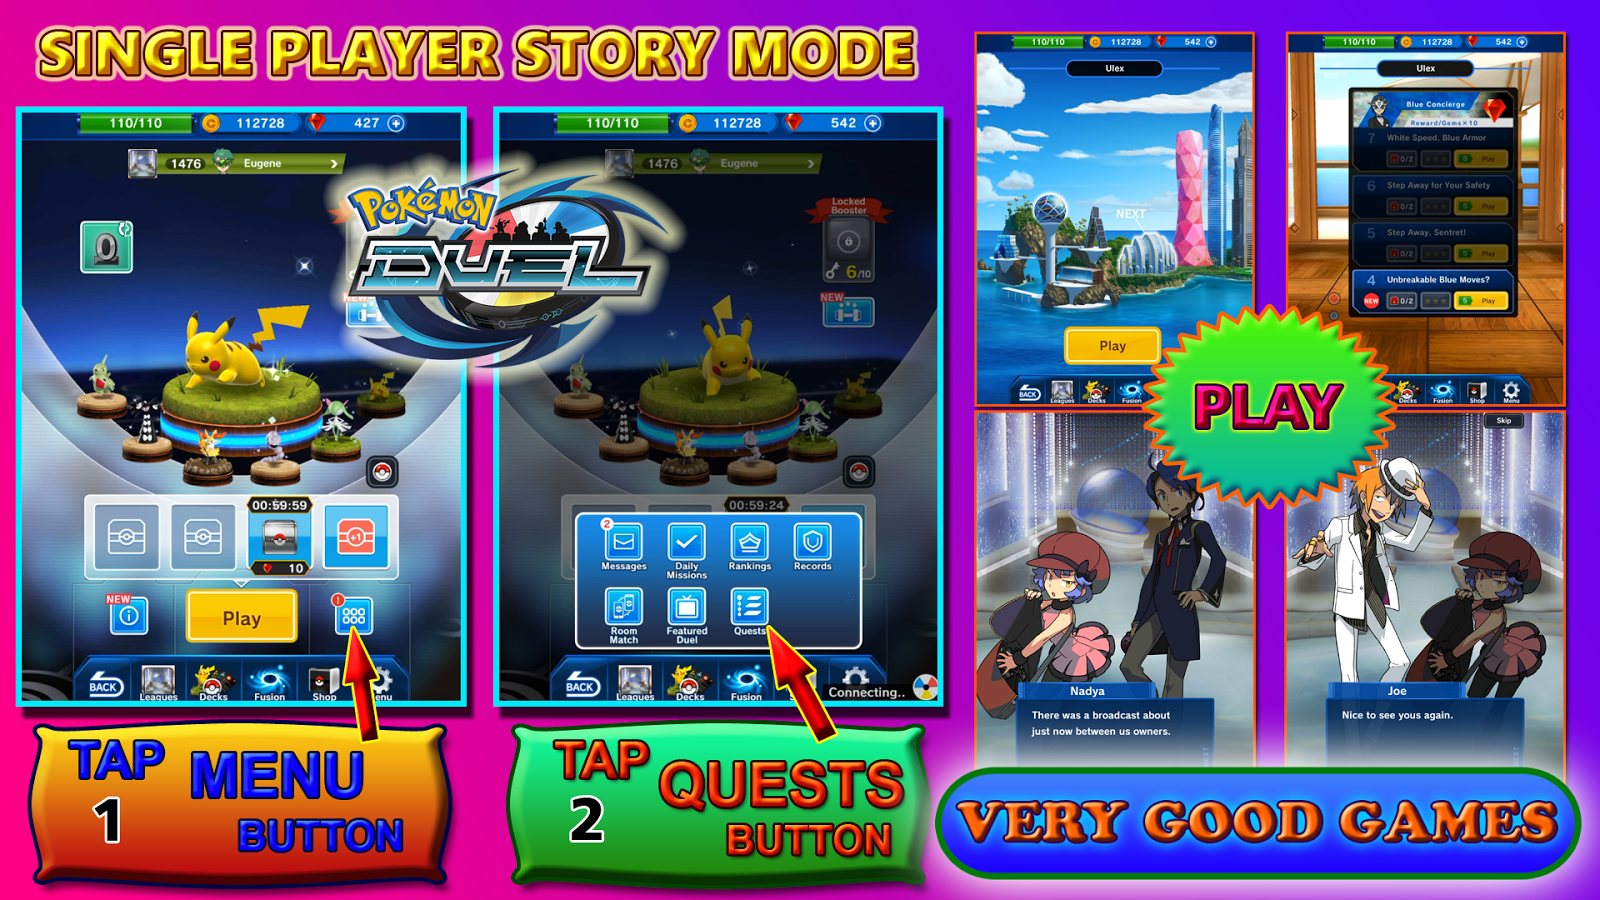 Pokemon Duel tutorial - quests or single player story mode